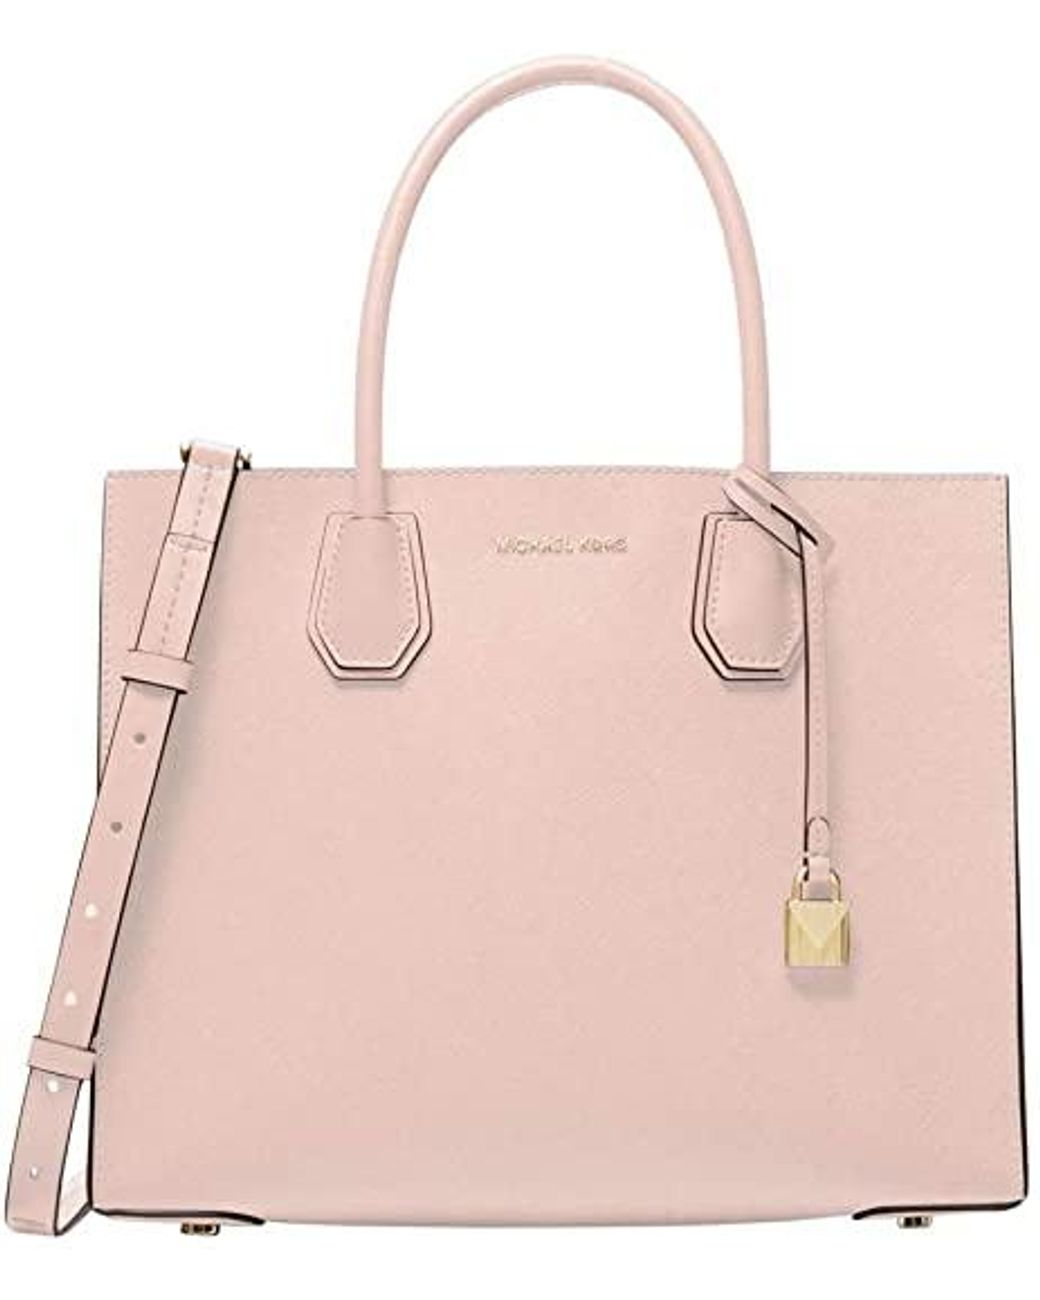 Michael Kors Mercer Large Convertible Soft Leather Tote Bag in Pink | Lyst